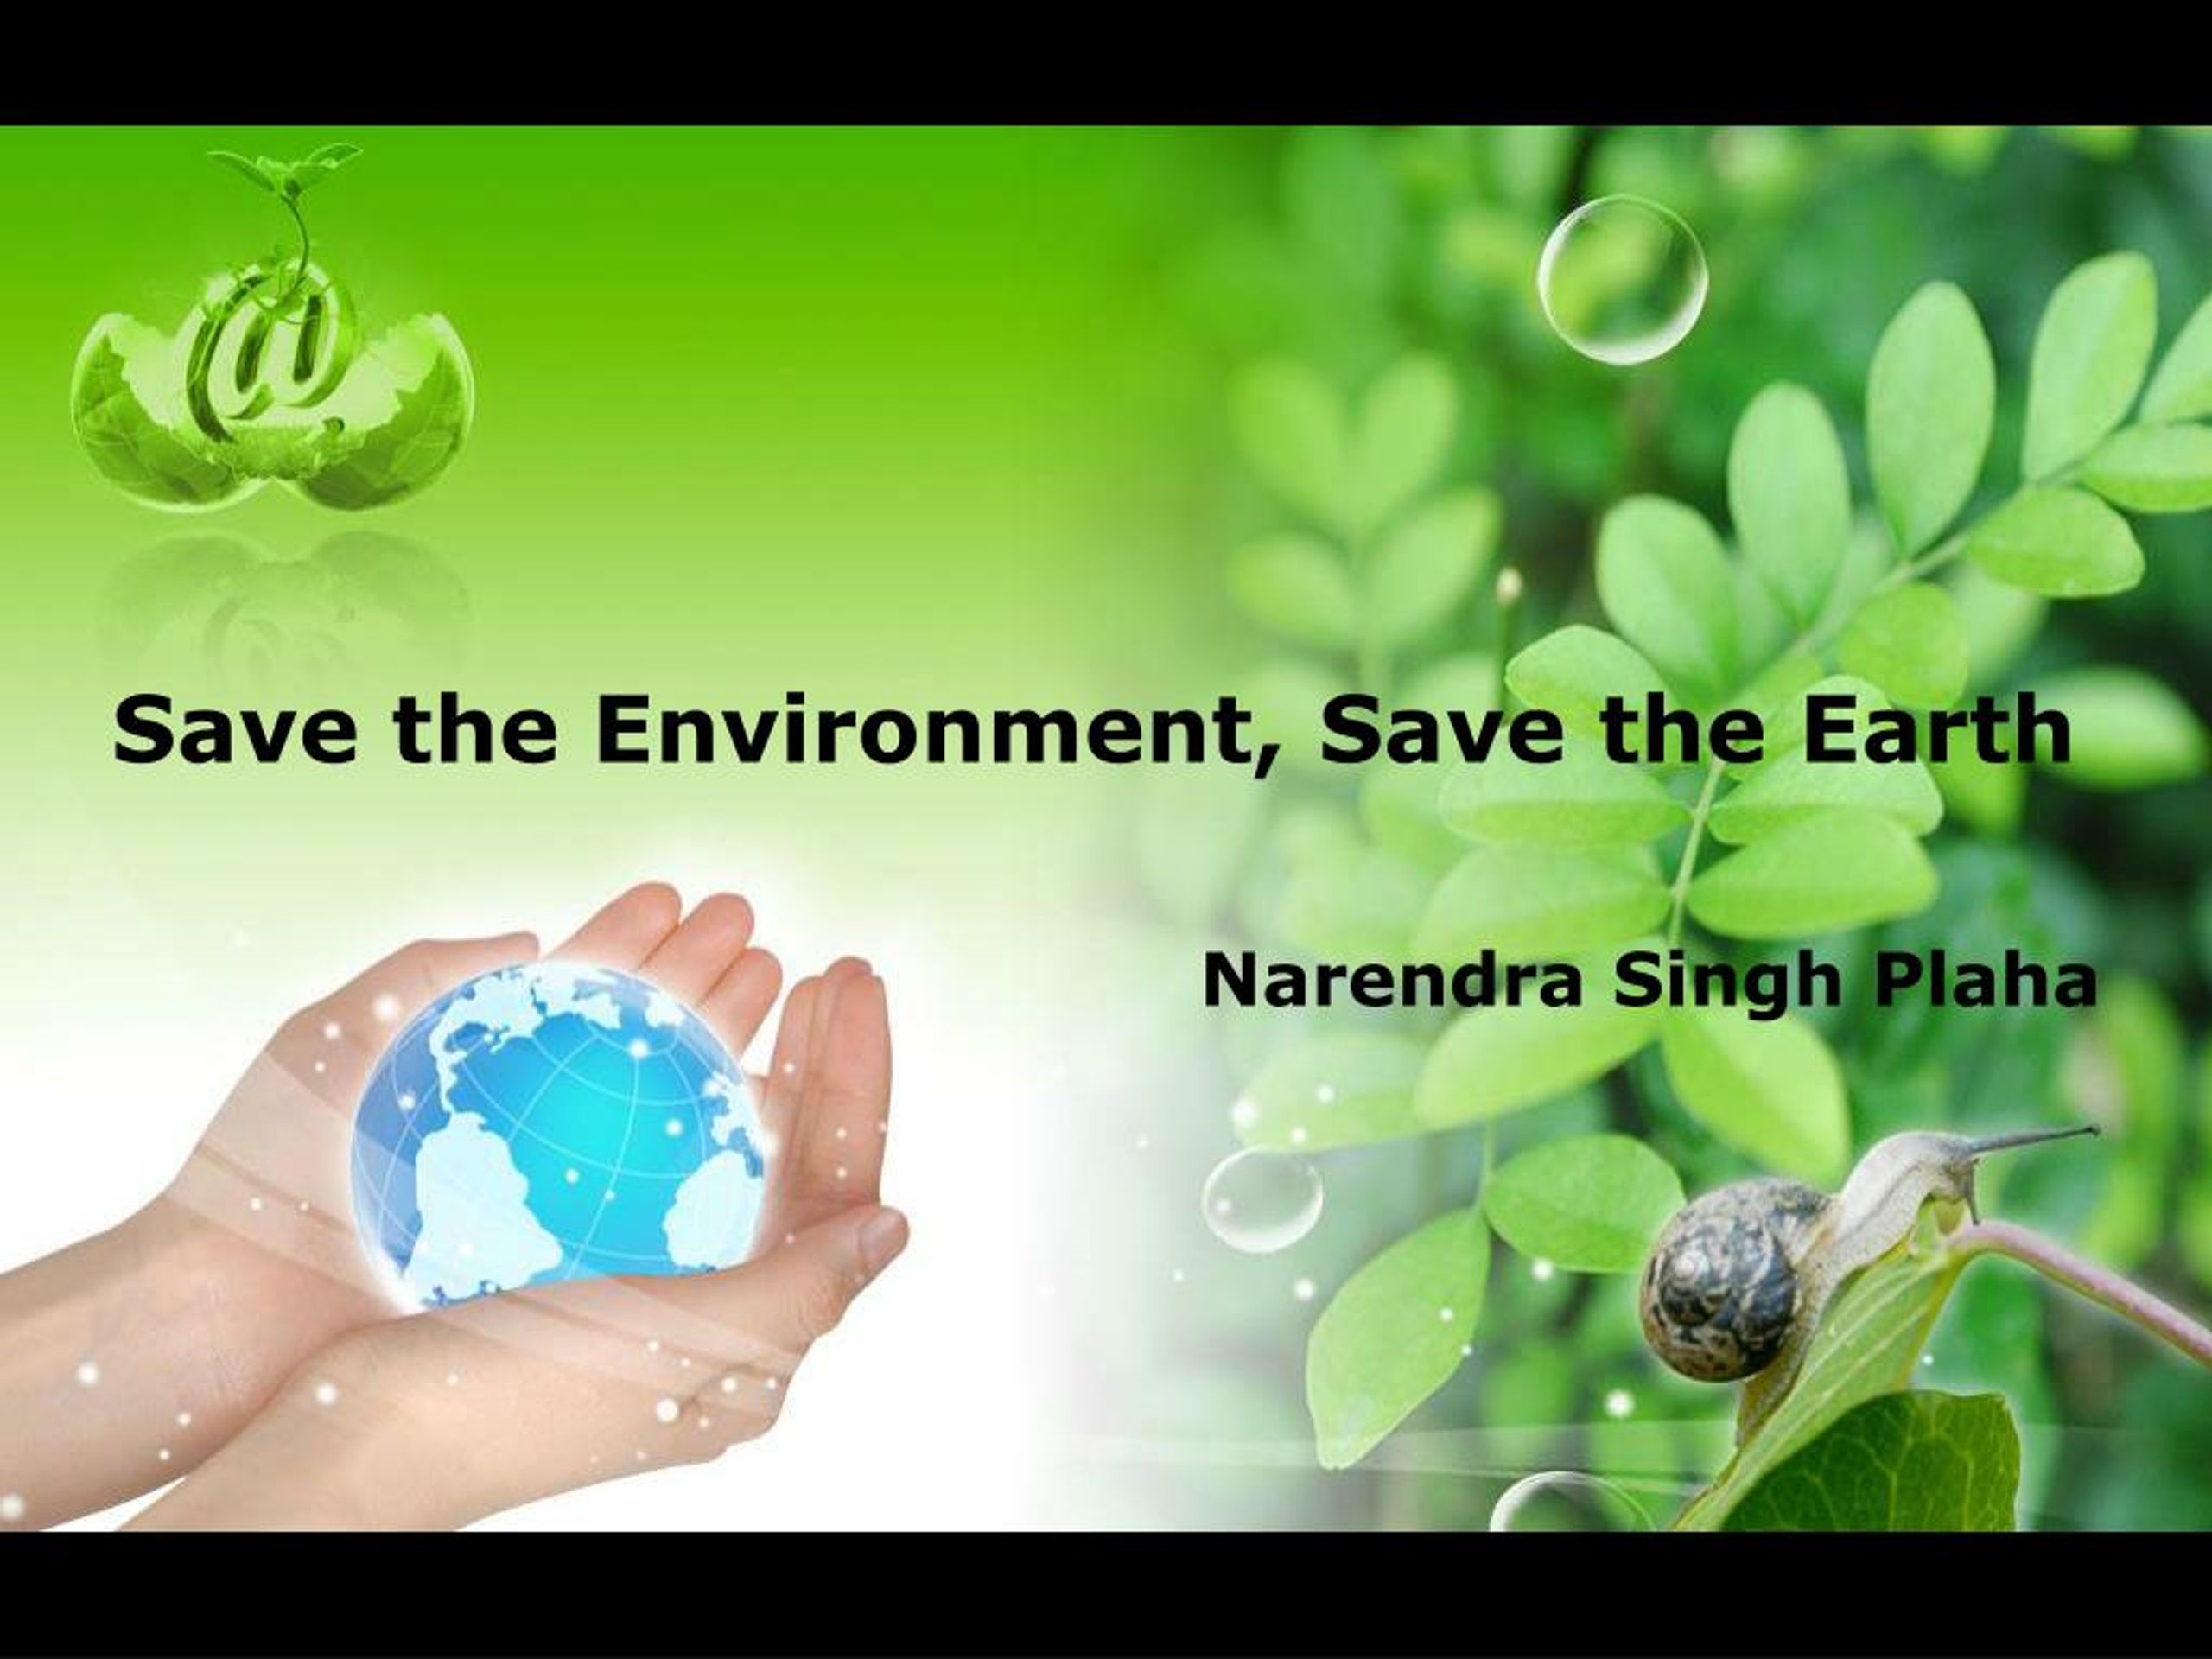 protect the environment presentation